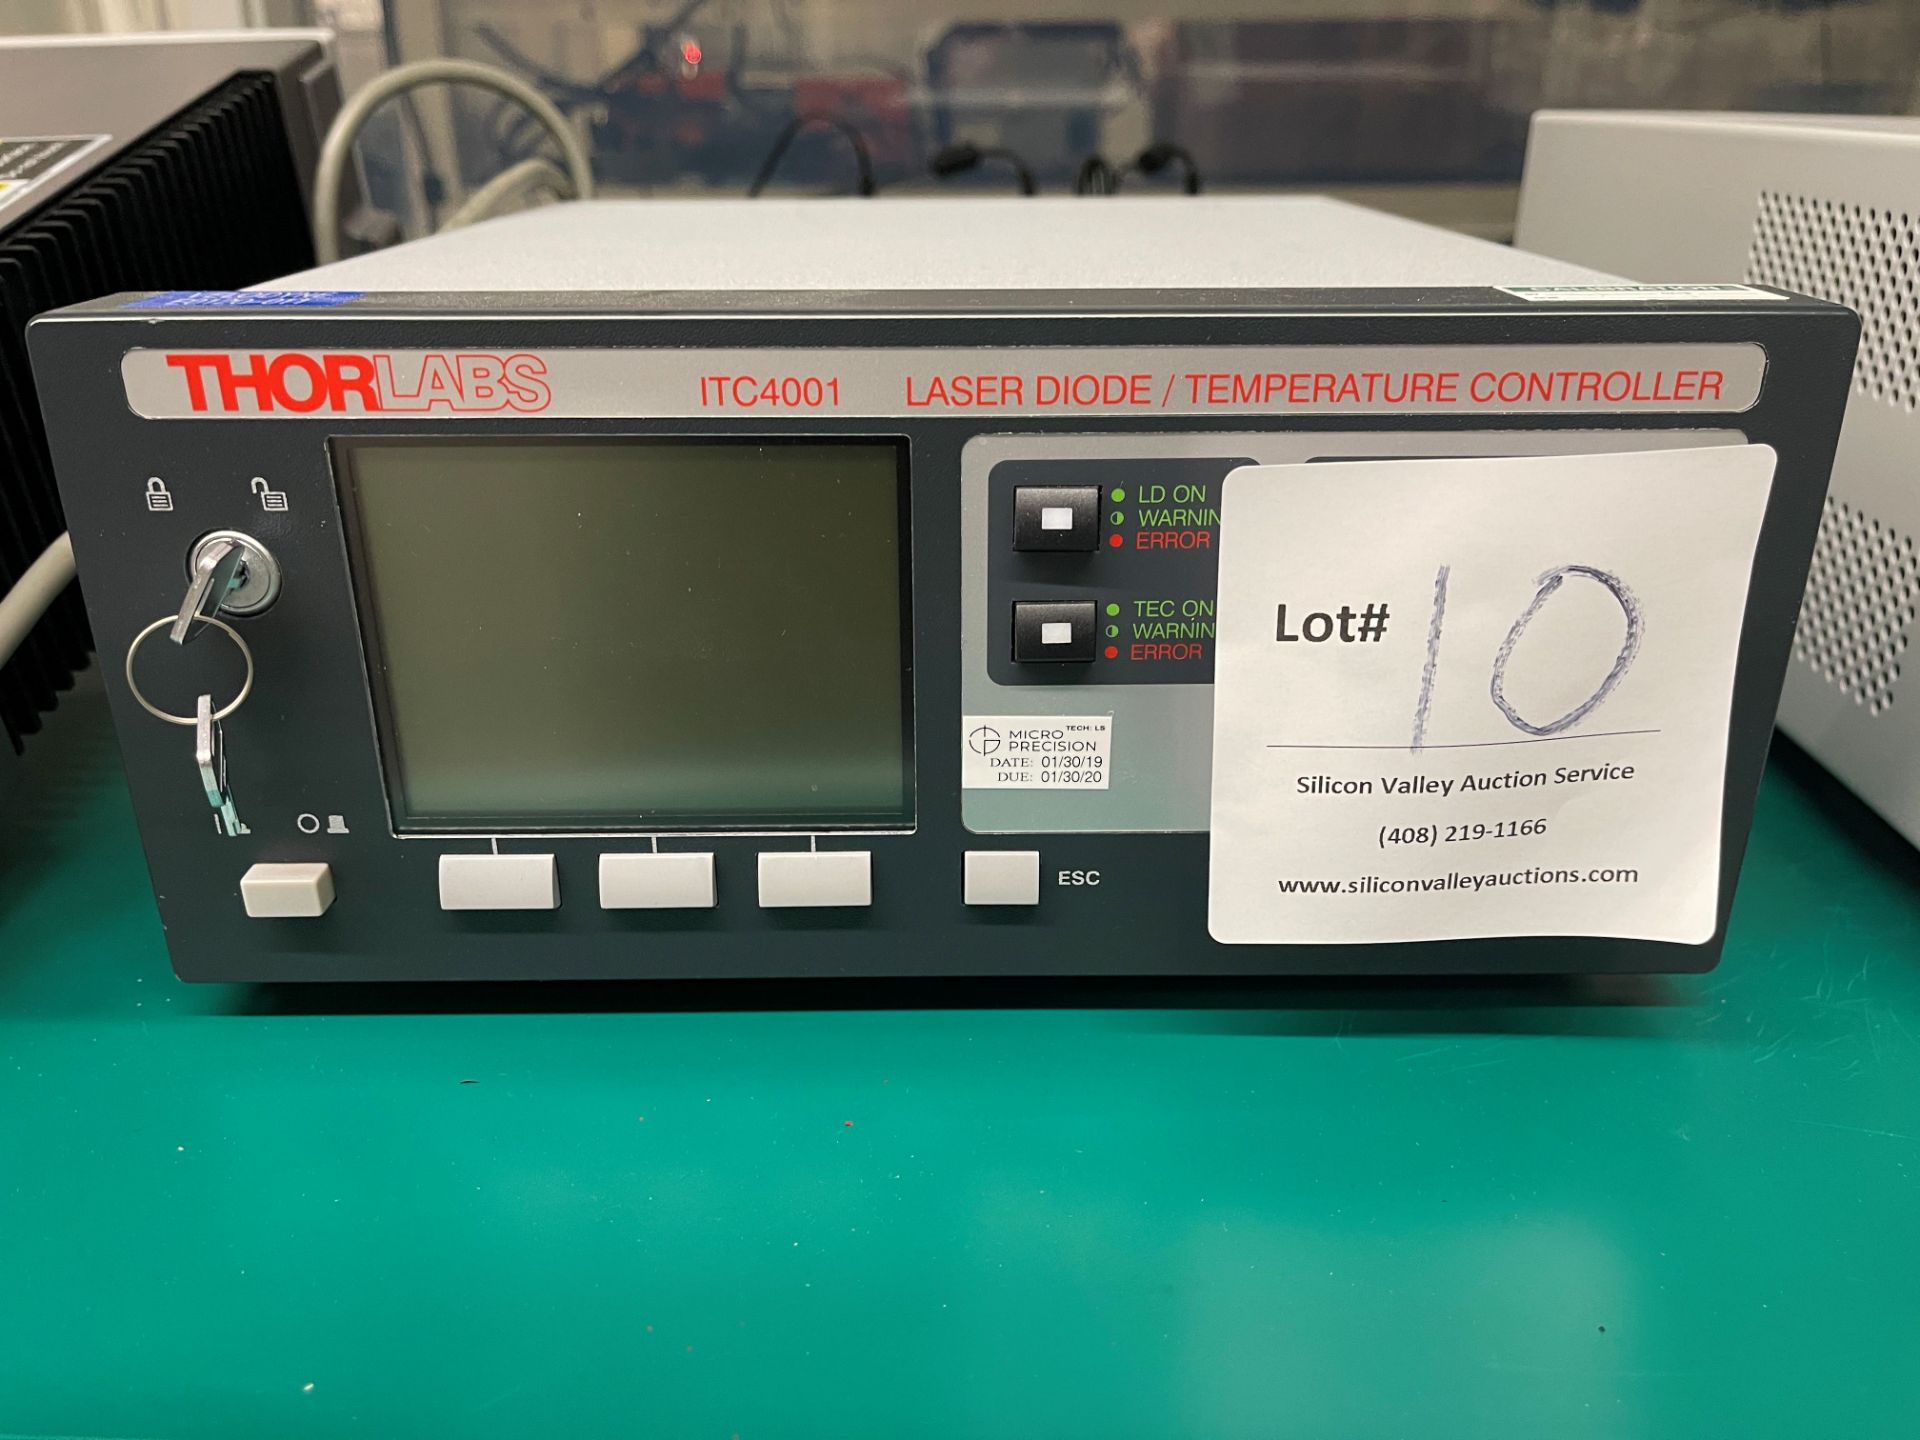 ThorLabs Laser Diode/Temperature Controller Model ITC4001